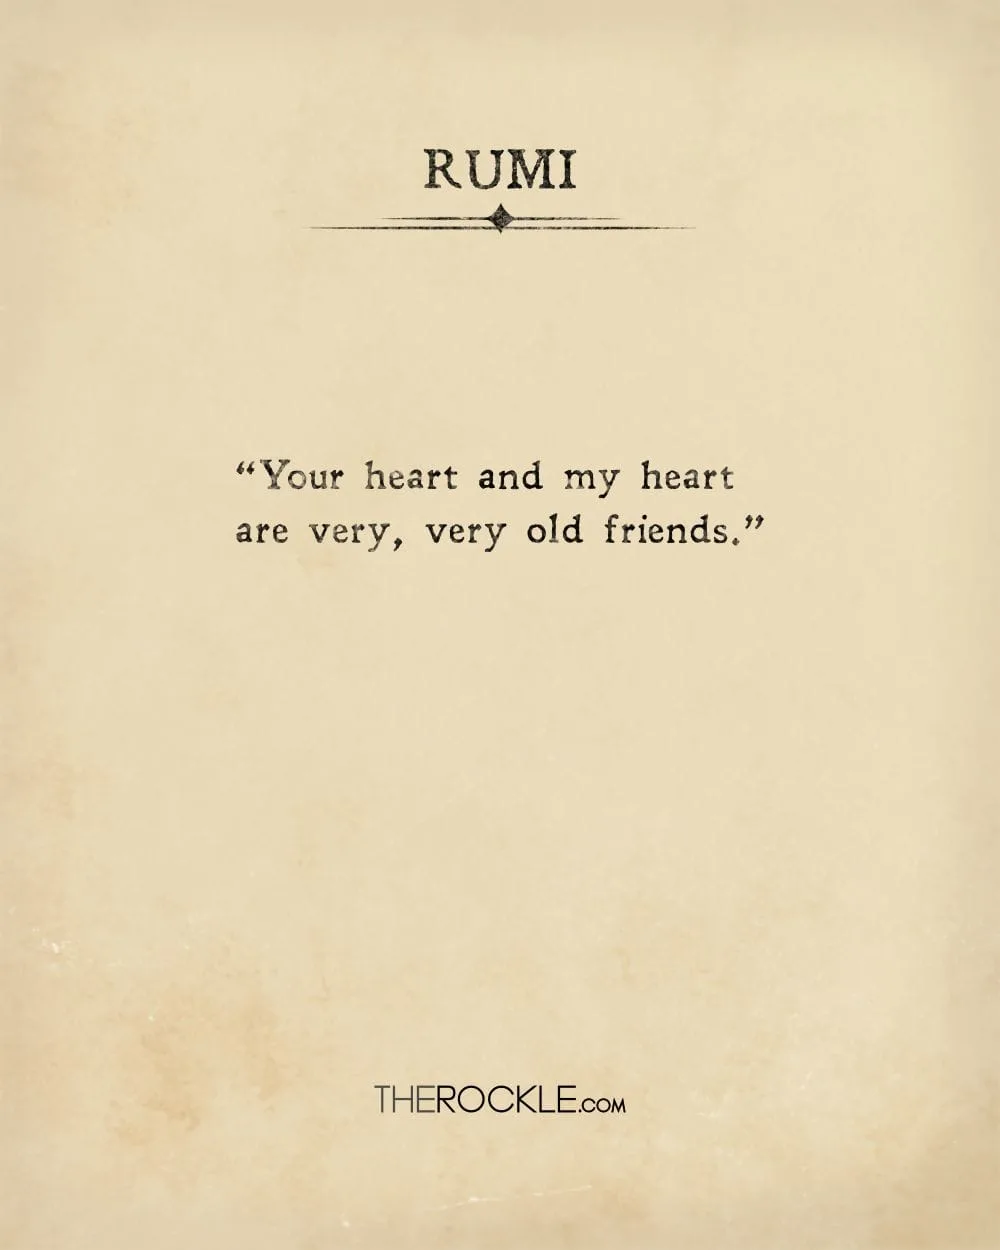 Rumi's quote about deep connections